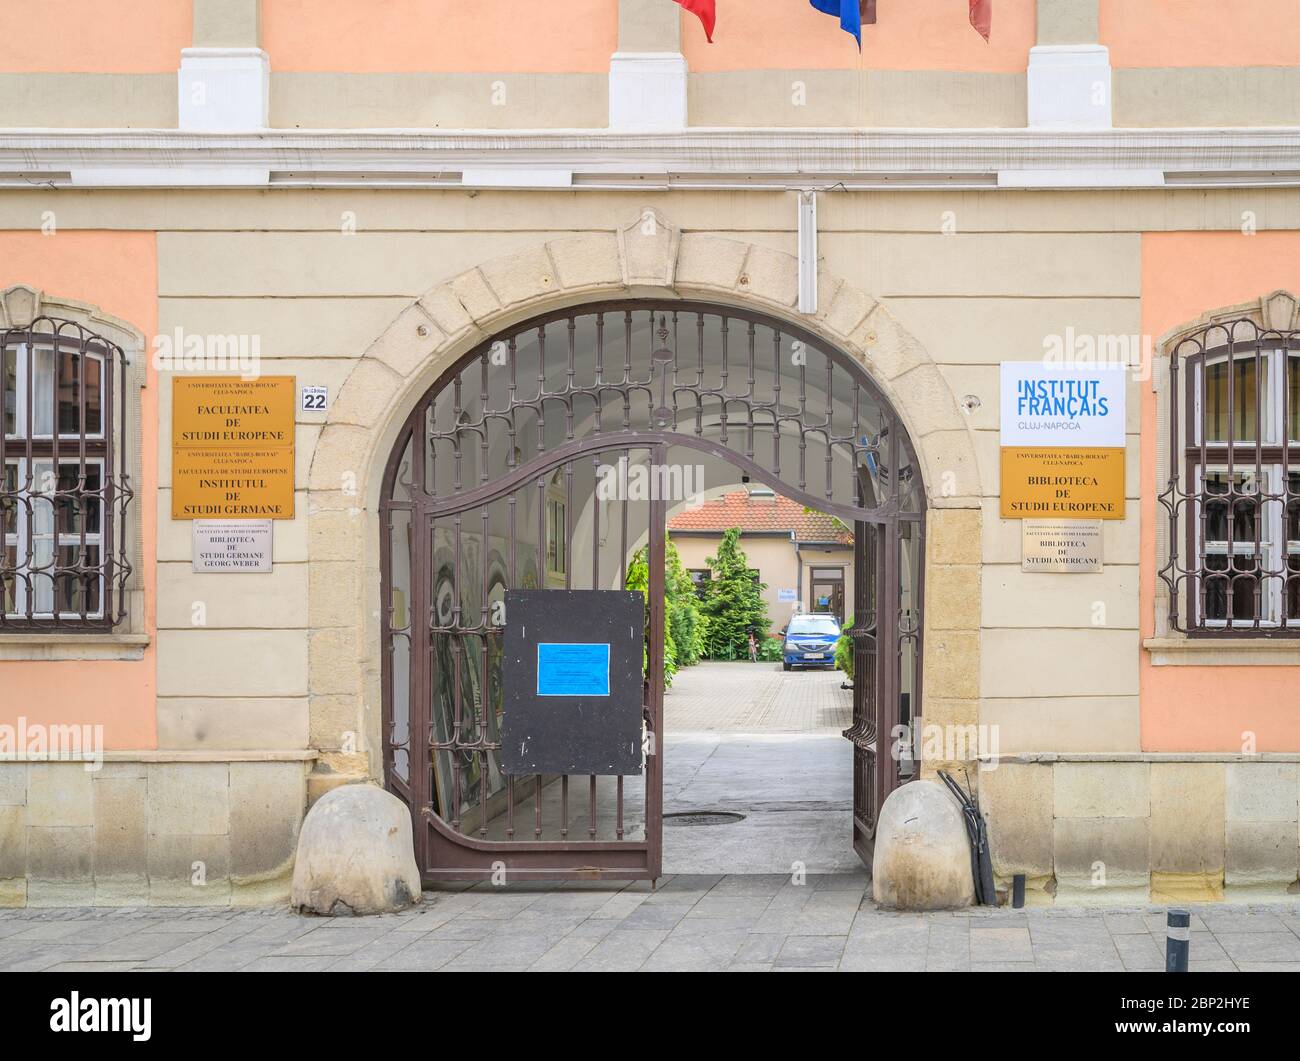 Cluj-Napoca, Romania - 15th May 2020: Entrance to the French Institute,  Faculty of European Studies, American Studies Library, European Studies  Librar Stock Photo - Alamy